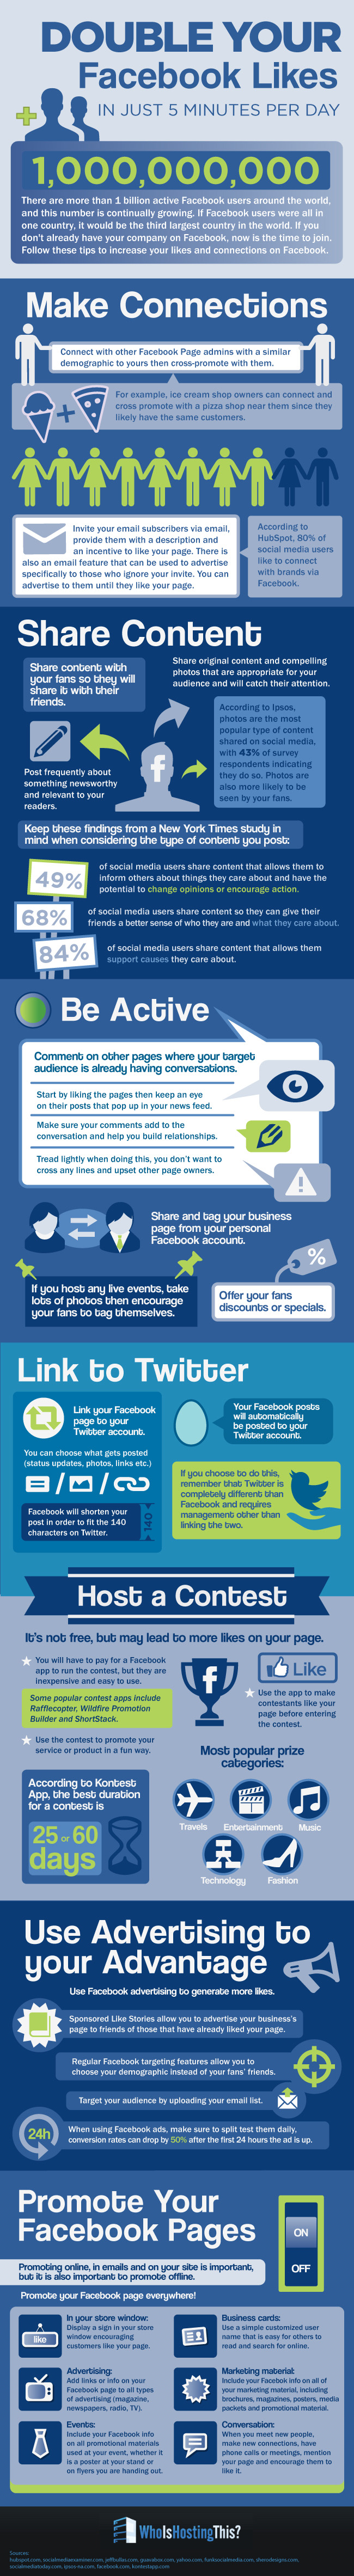 Double Your Facebook Page Likes in Just 5 Minutes a Day [Infographic]